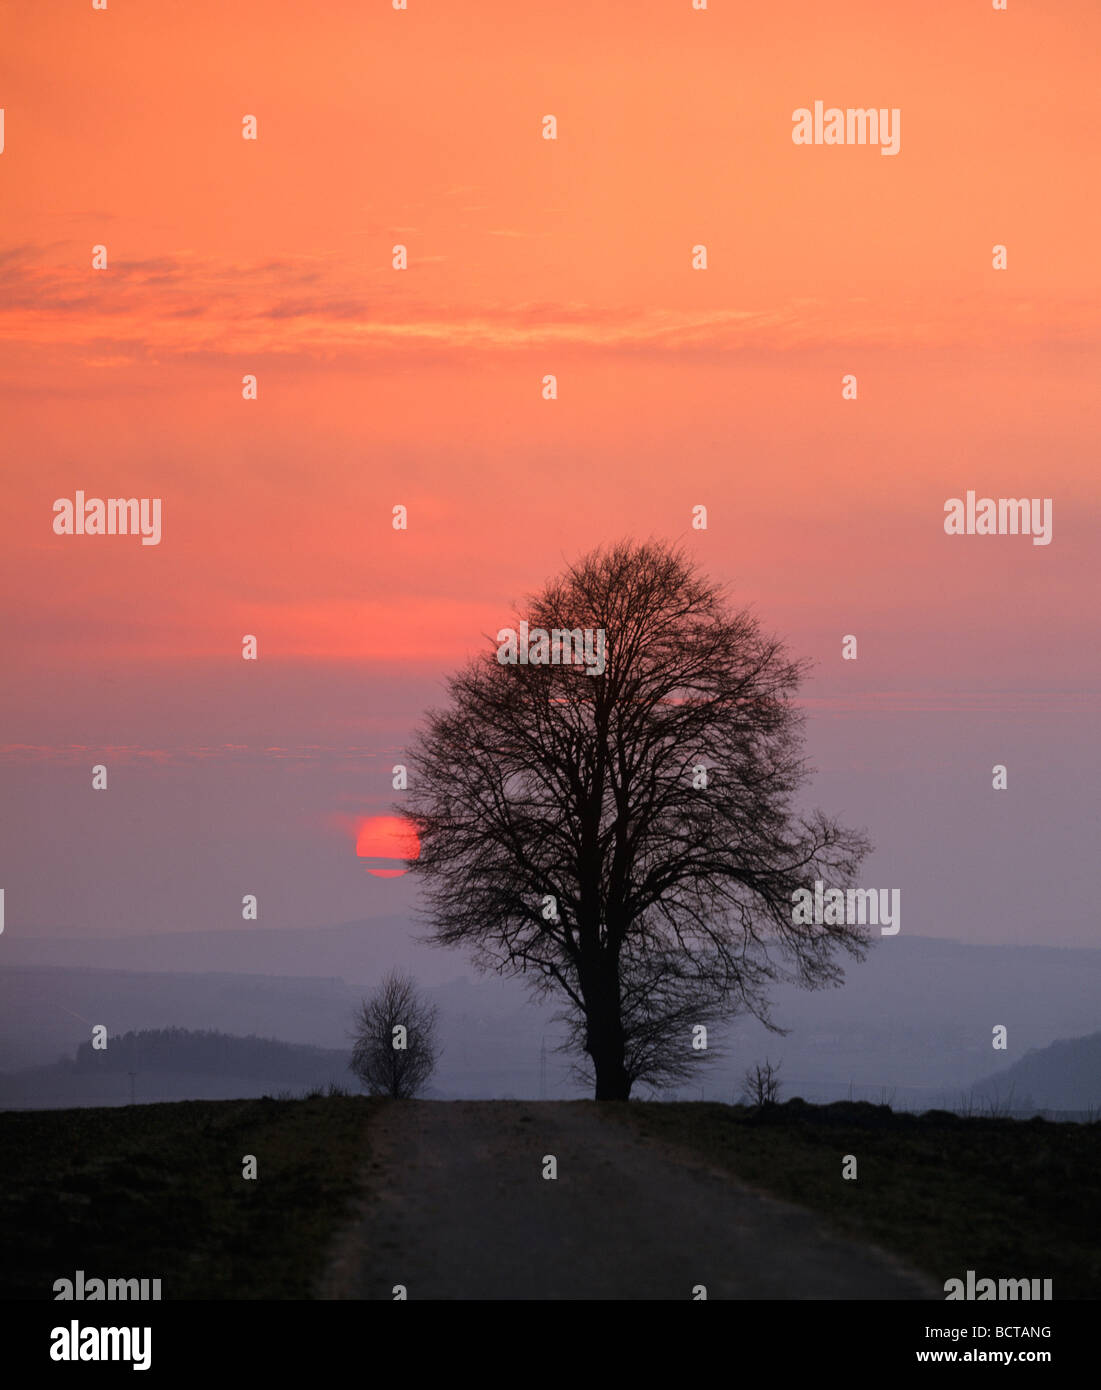 Lime tree (Tilia) in front of sunset, dusk, evening sky, Germany, Europe Stock Photo